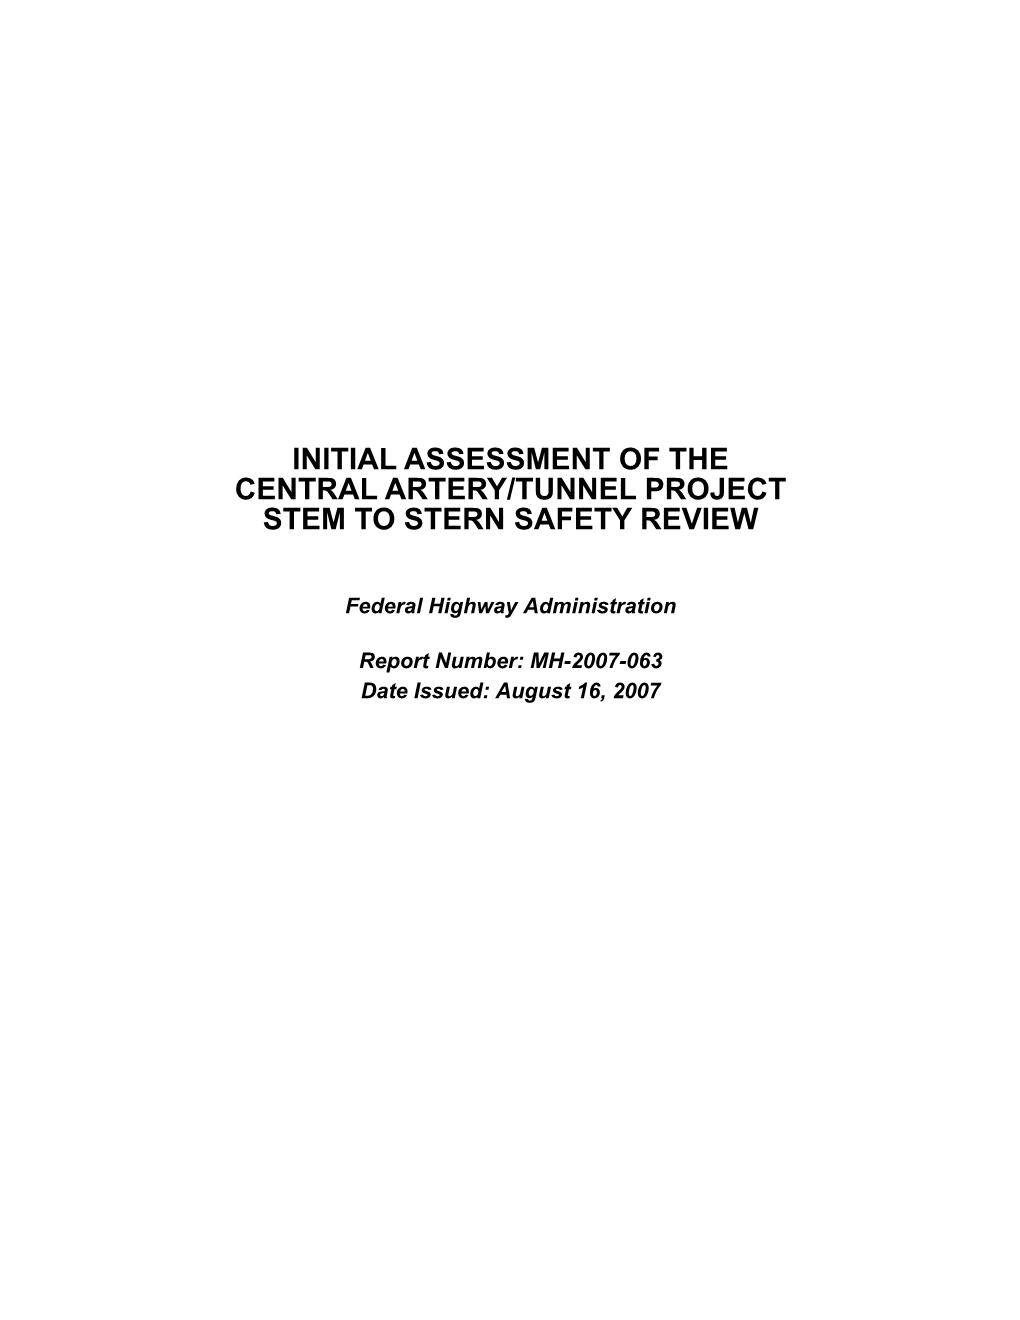 Initial Assessment of the Central Artery/Tunnel Project Stem to Stern Safety Review